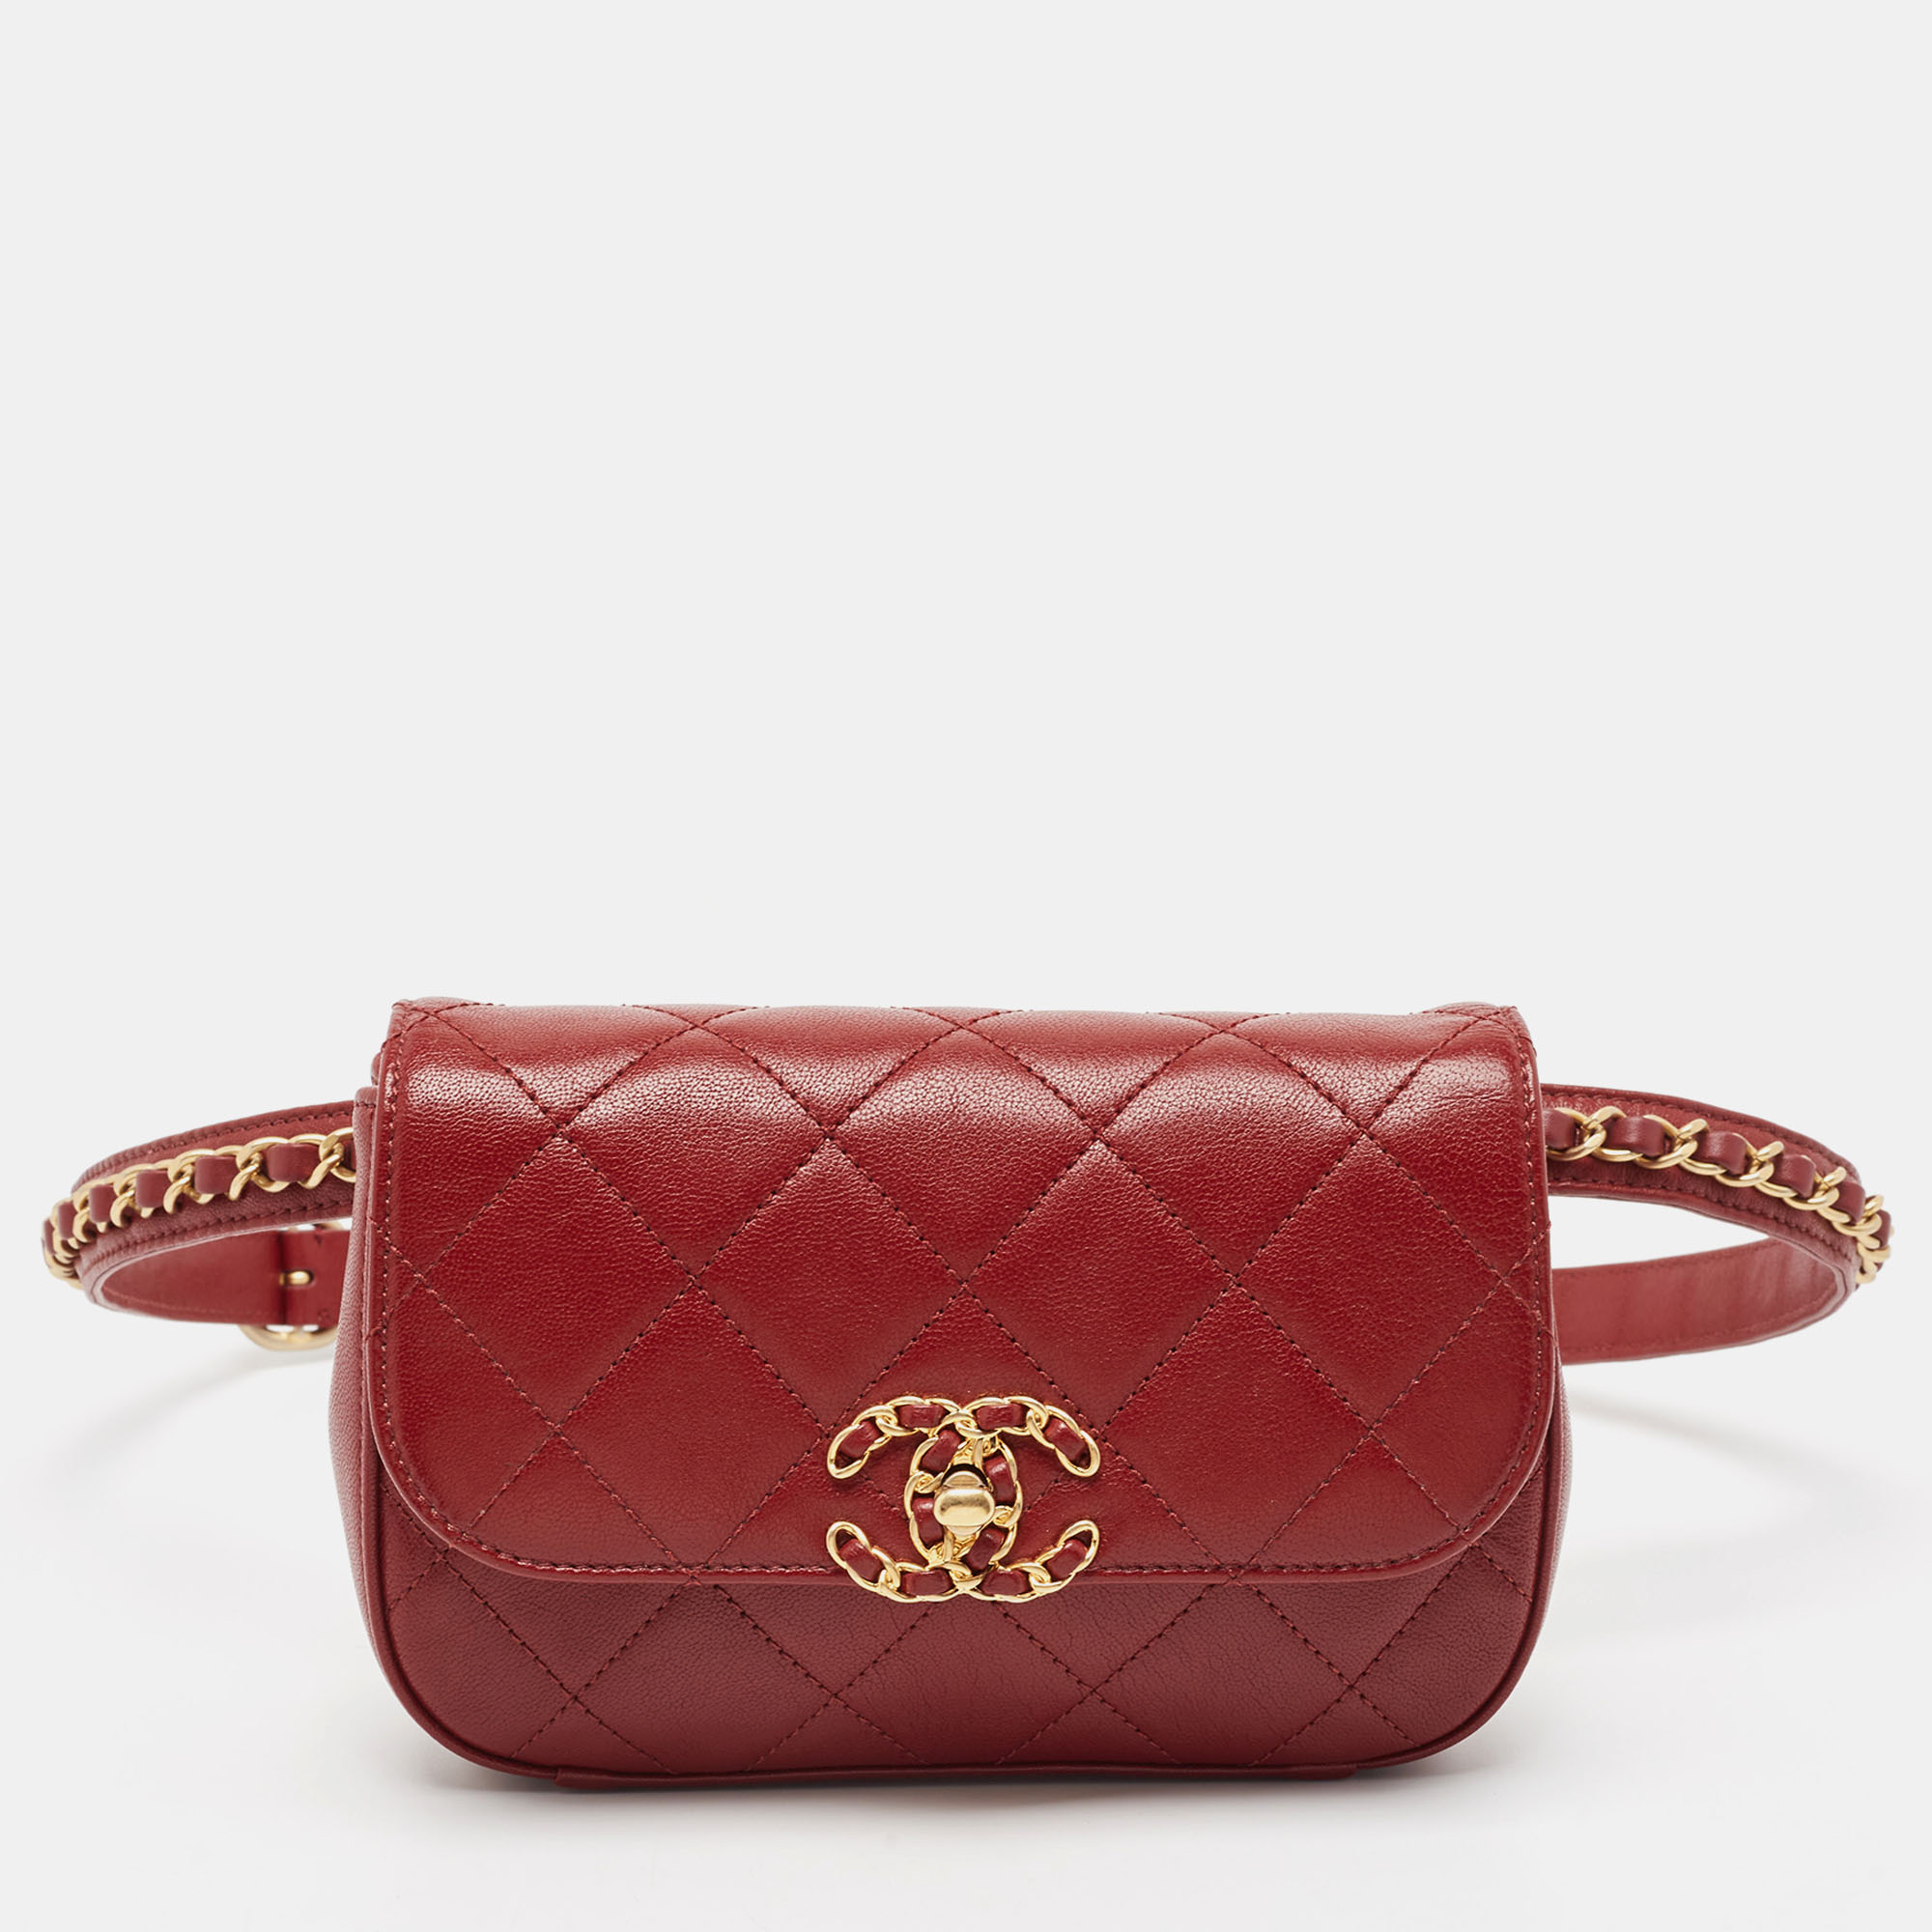 Pre-owned Chanel Dark Red Quilted Leather Cc Flap Belt Bag